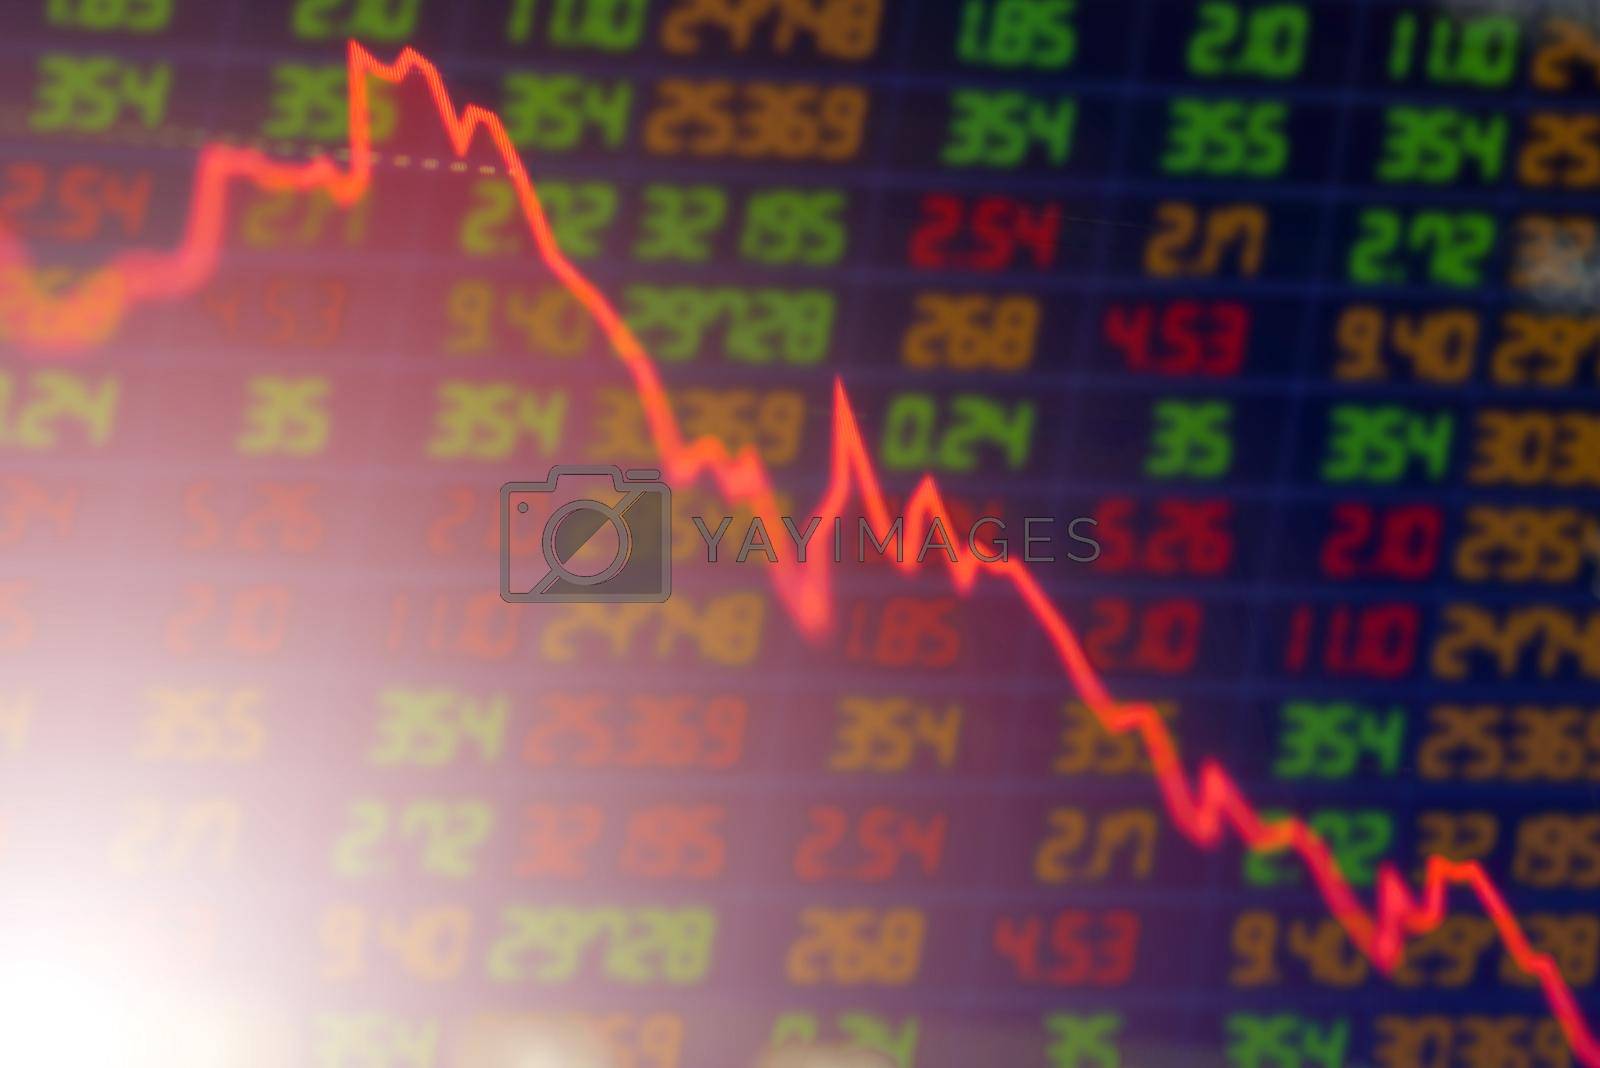 Royalty free image of concept Stock exchange market business Downtrend line graph stock market  with selective focus effect.  by C_Aphirak